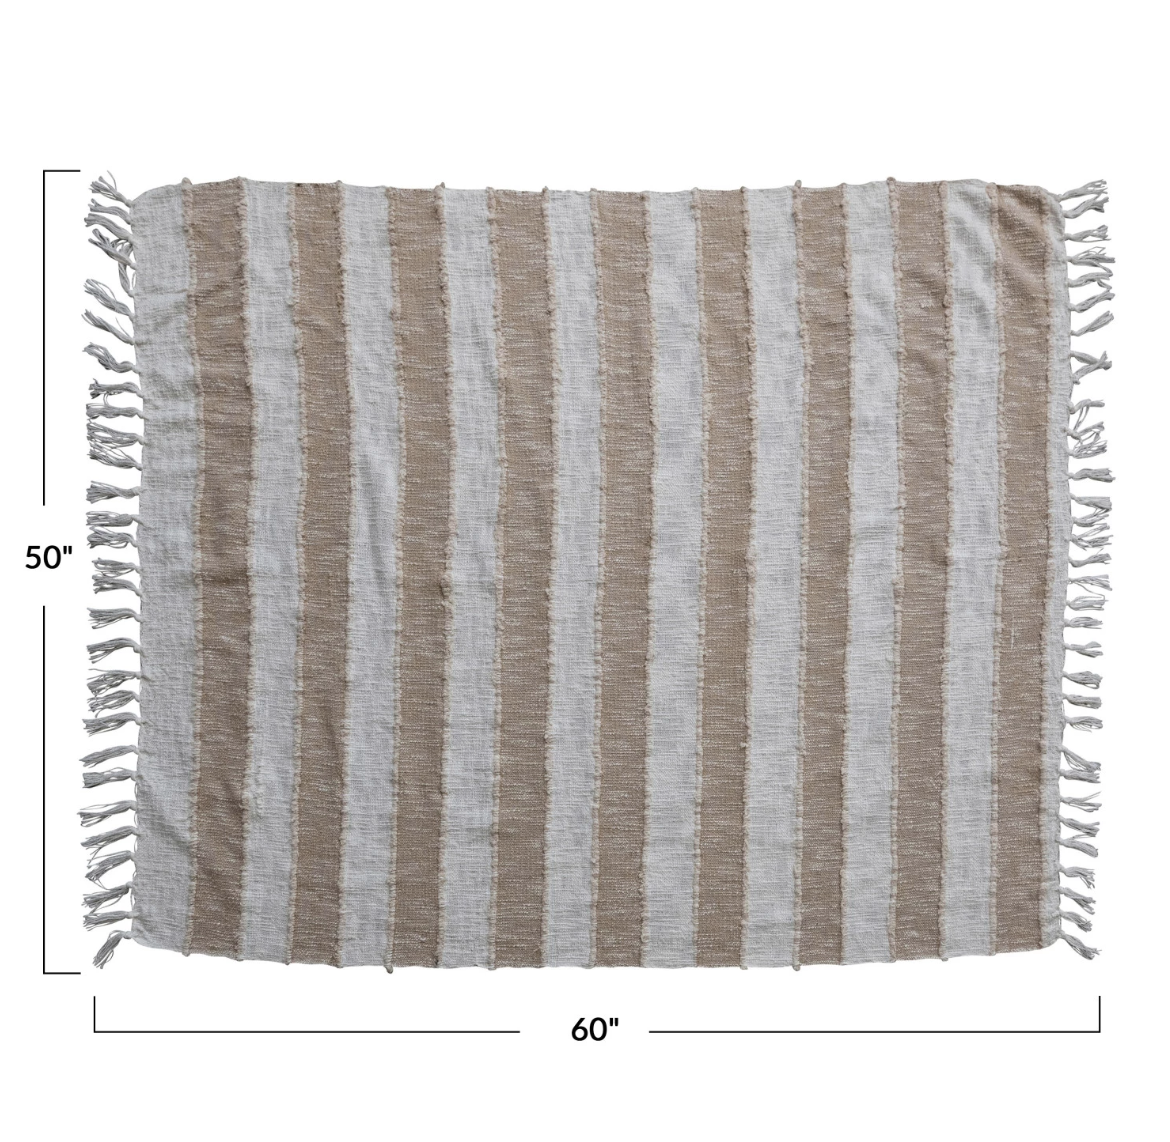 Woven Cotton Throw w/ Stripes & Fringe, Tan Color & Natural